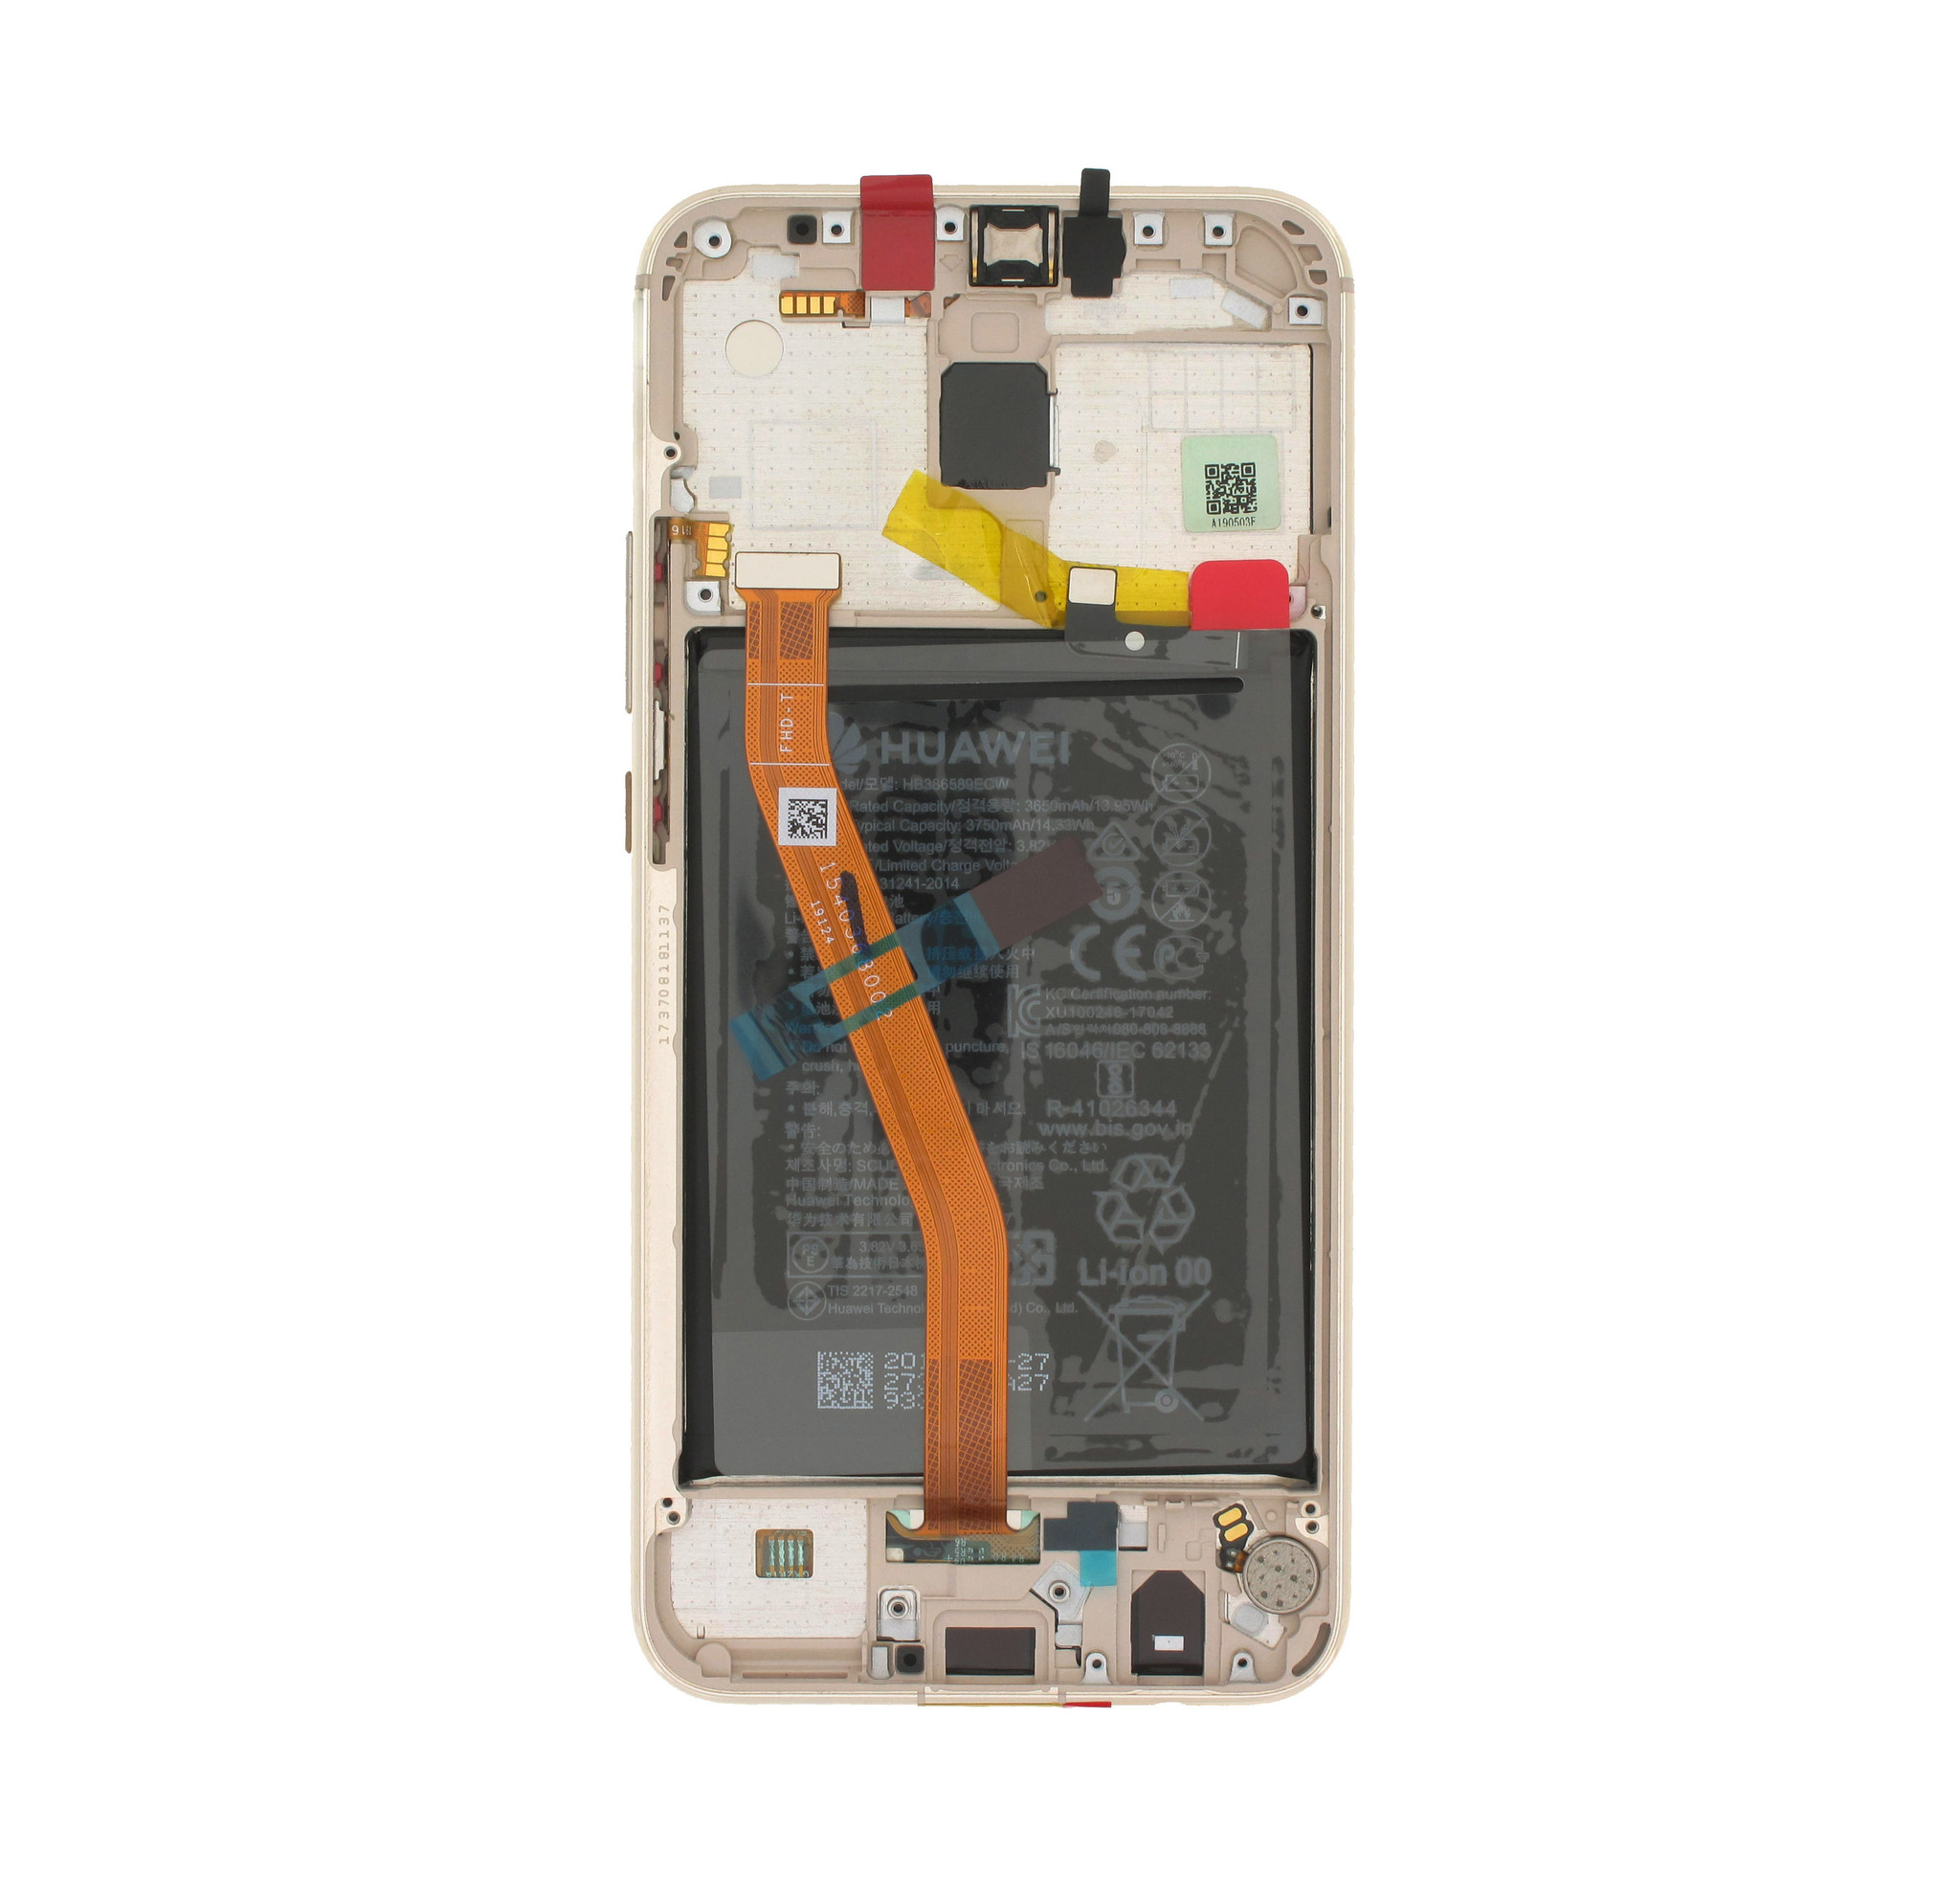 Huawei 20 lite Display, Gold, Battery HB386589ECW, 02352DKN;02352DFP;02352GTV Parts4GSM